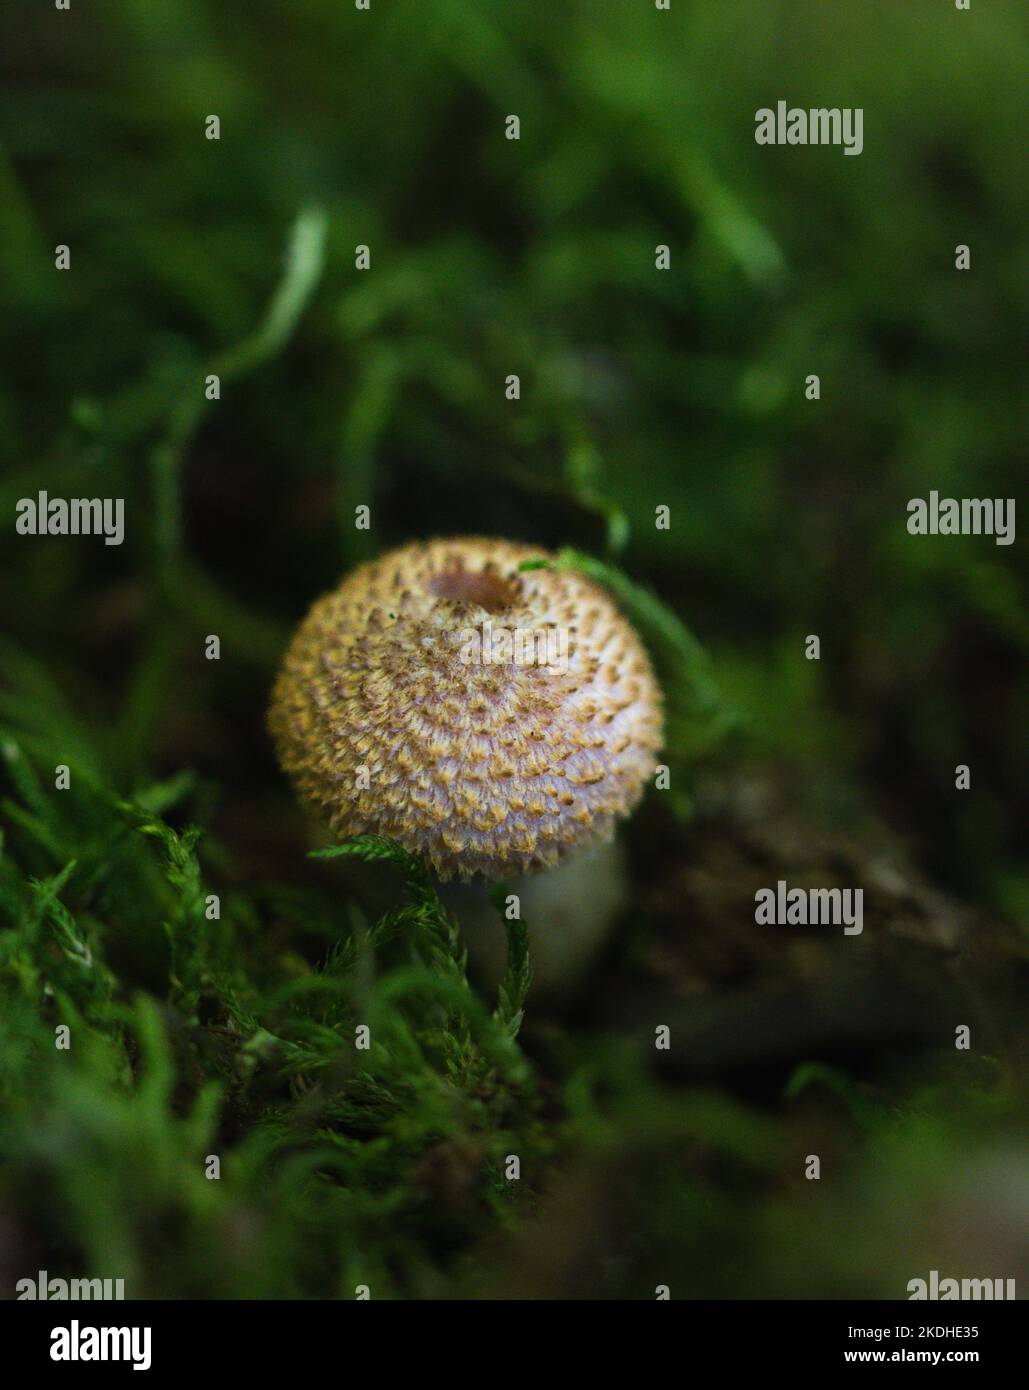 Close up of single mushroom growing in green moss on forest floor. Stock Photo